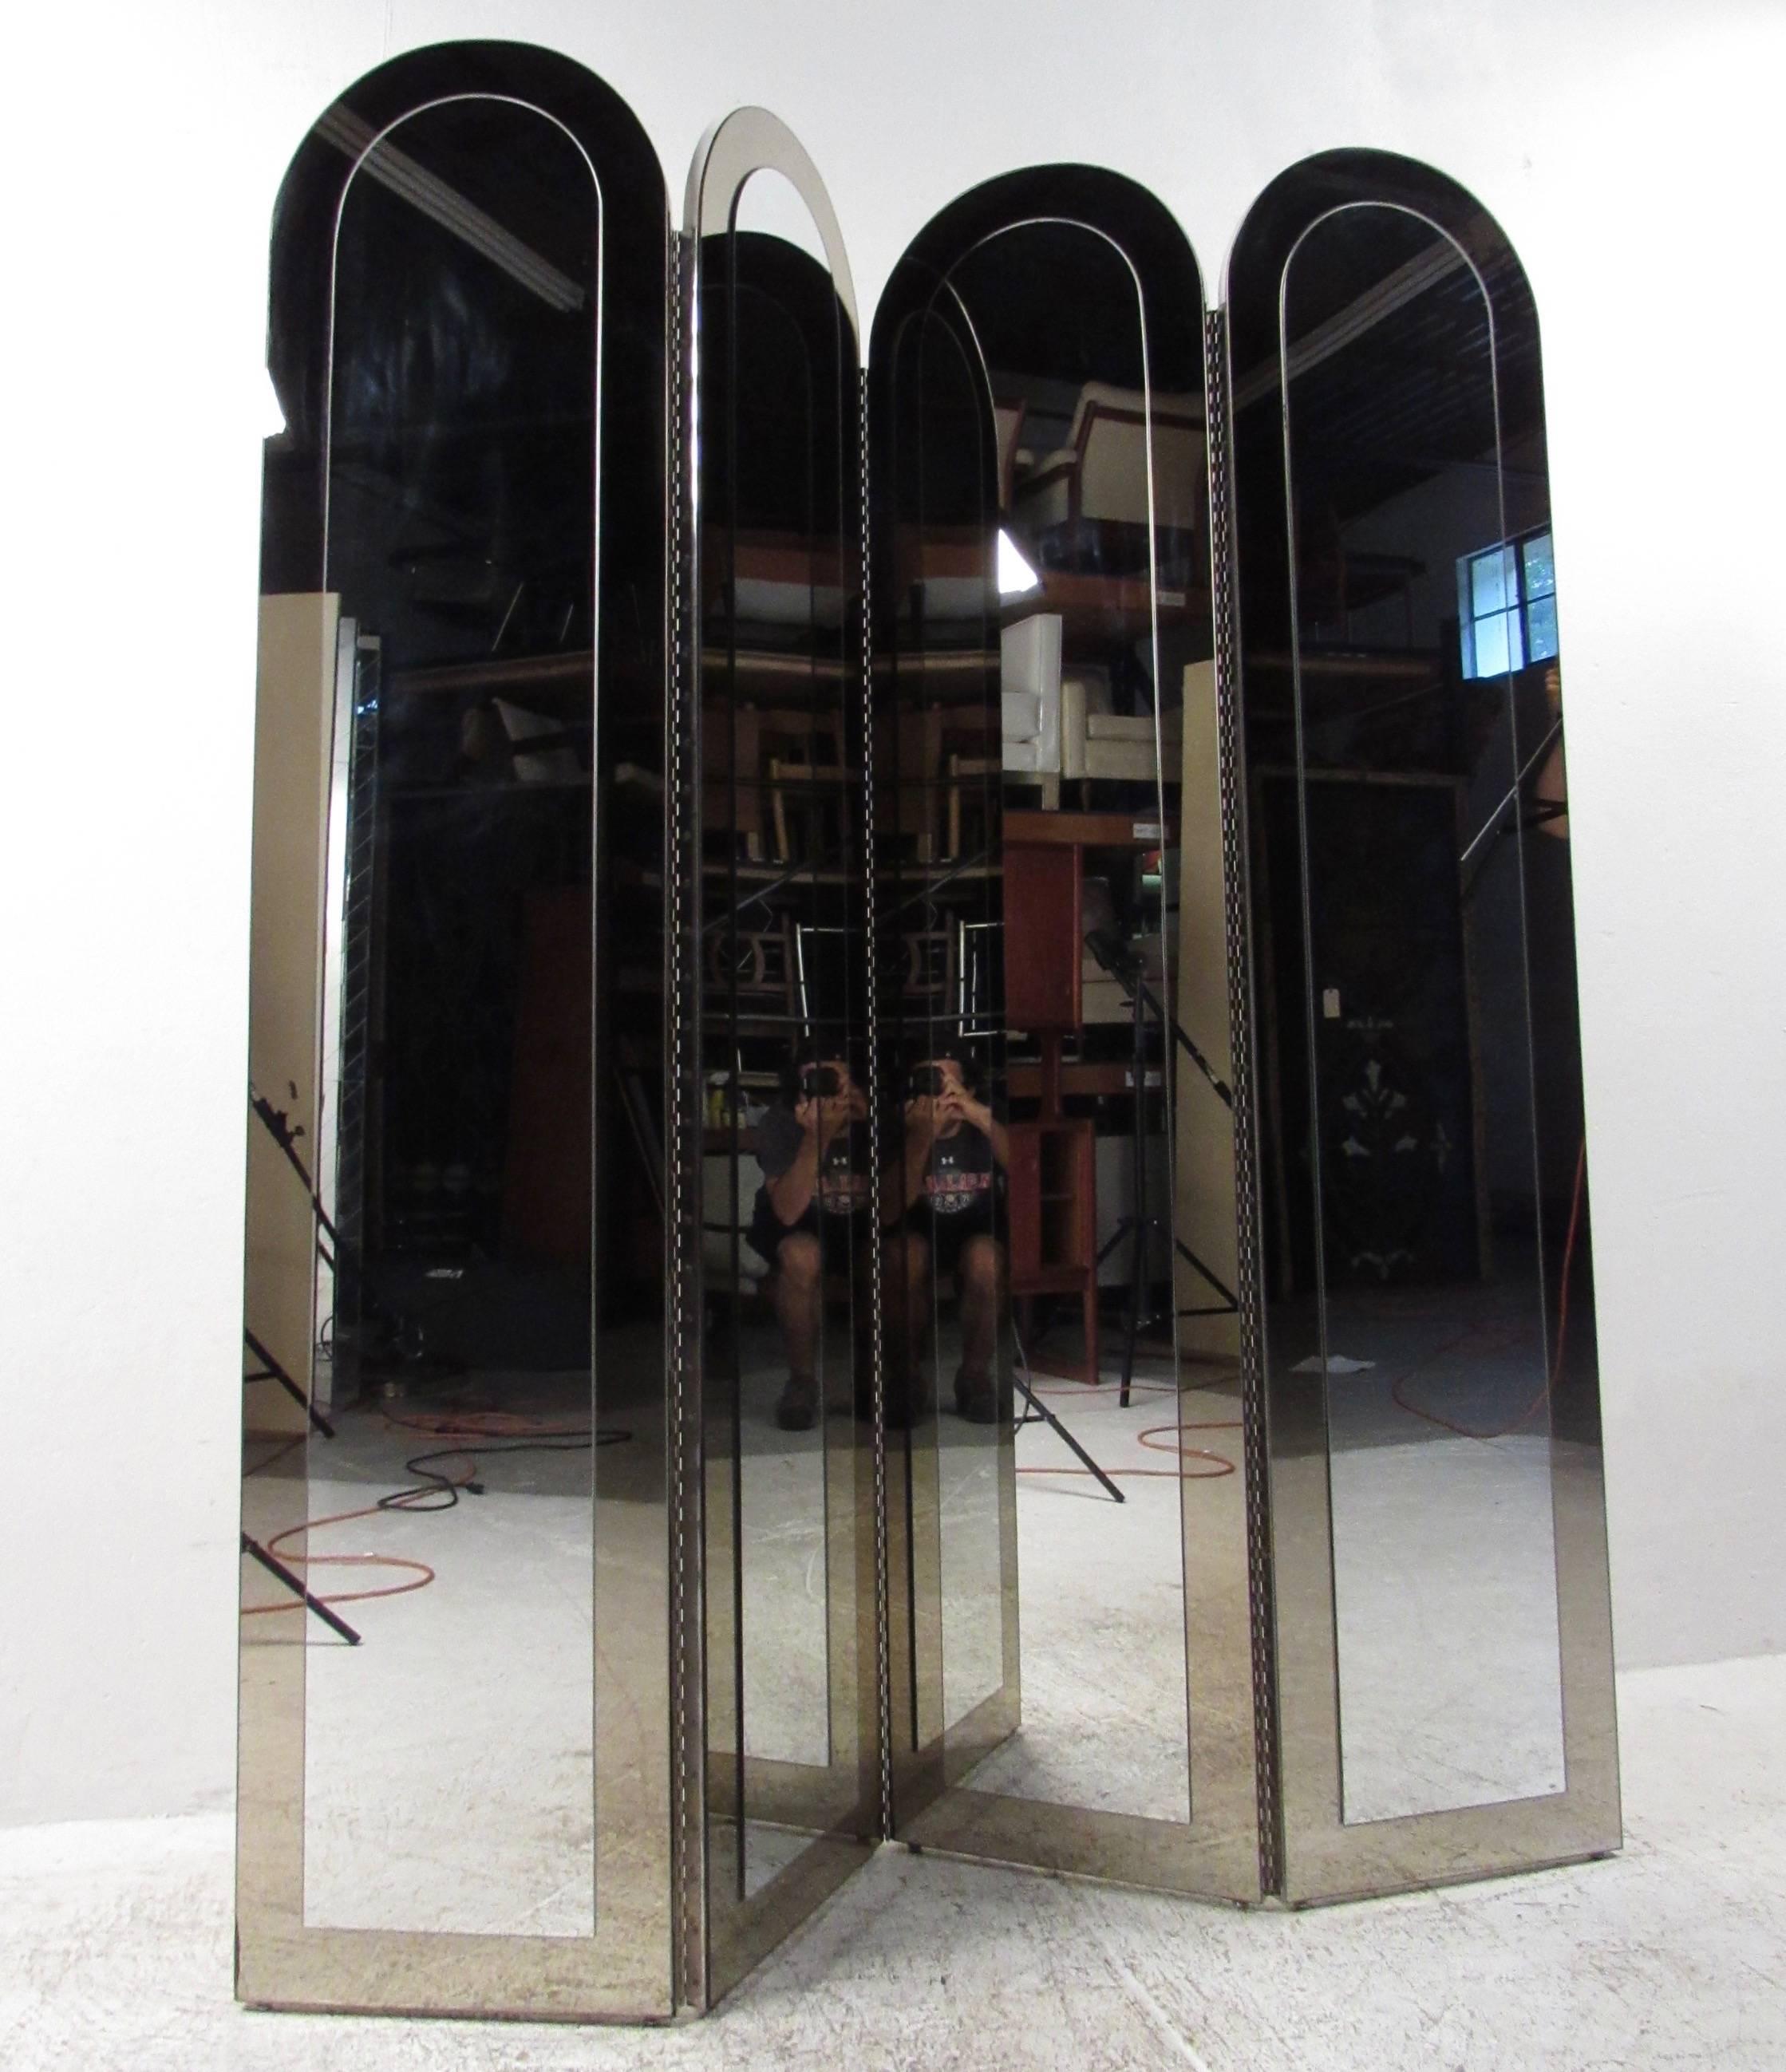 This stunning vintage room divider features tall two-tone mirrored glass panels with unique arched tops. Fold up screen is ideal for home or business use and makes an elegant screen in any setting. Please confirm item location (NY or NJ).